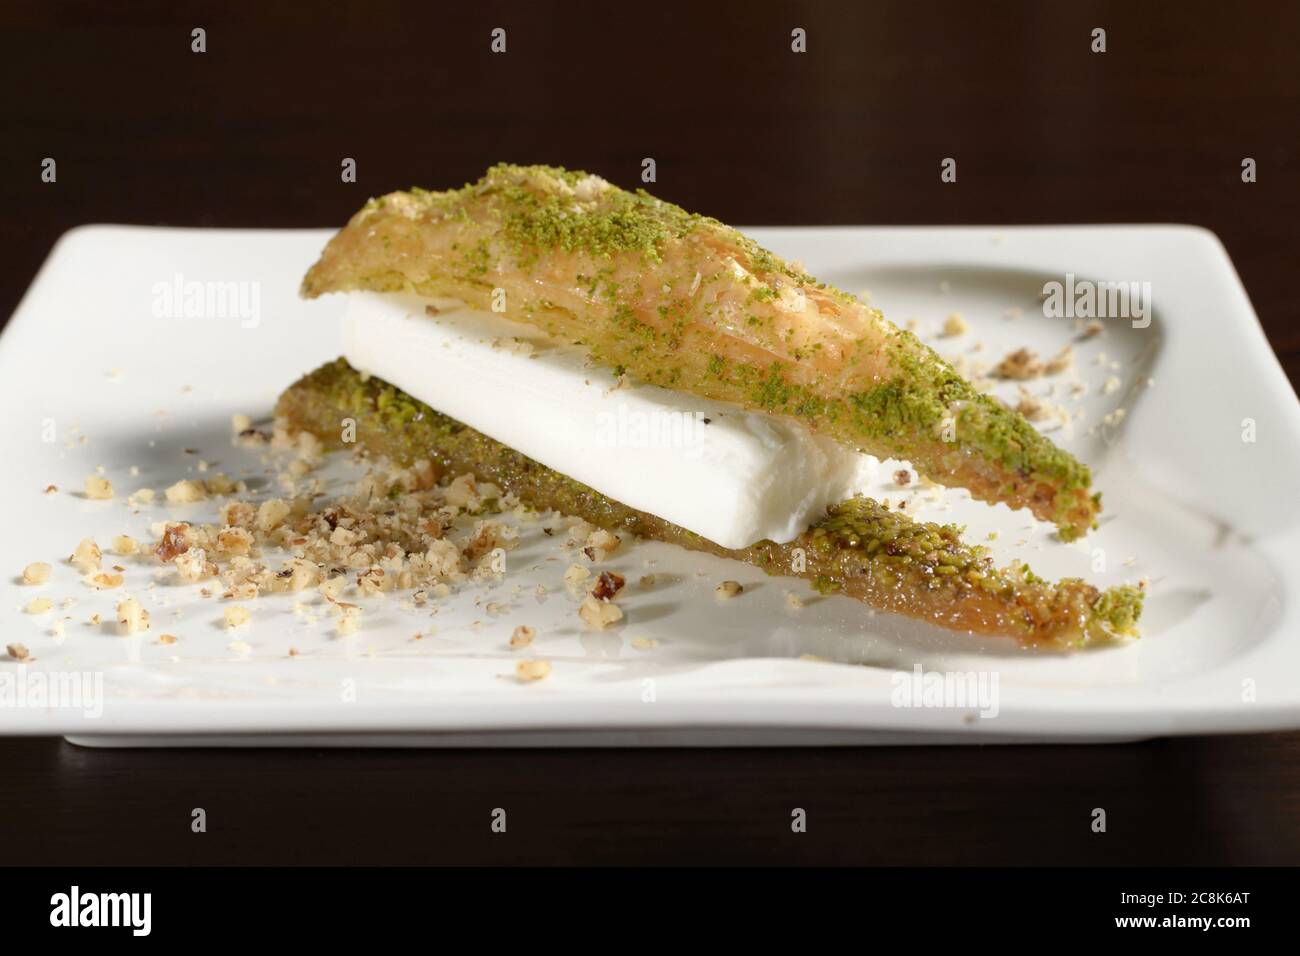 Triangular Turkish baklava with ice cream on a plate close up. Photos for restaurant and cafe menus Stock Photo